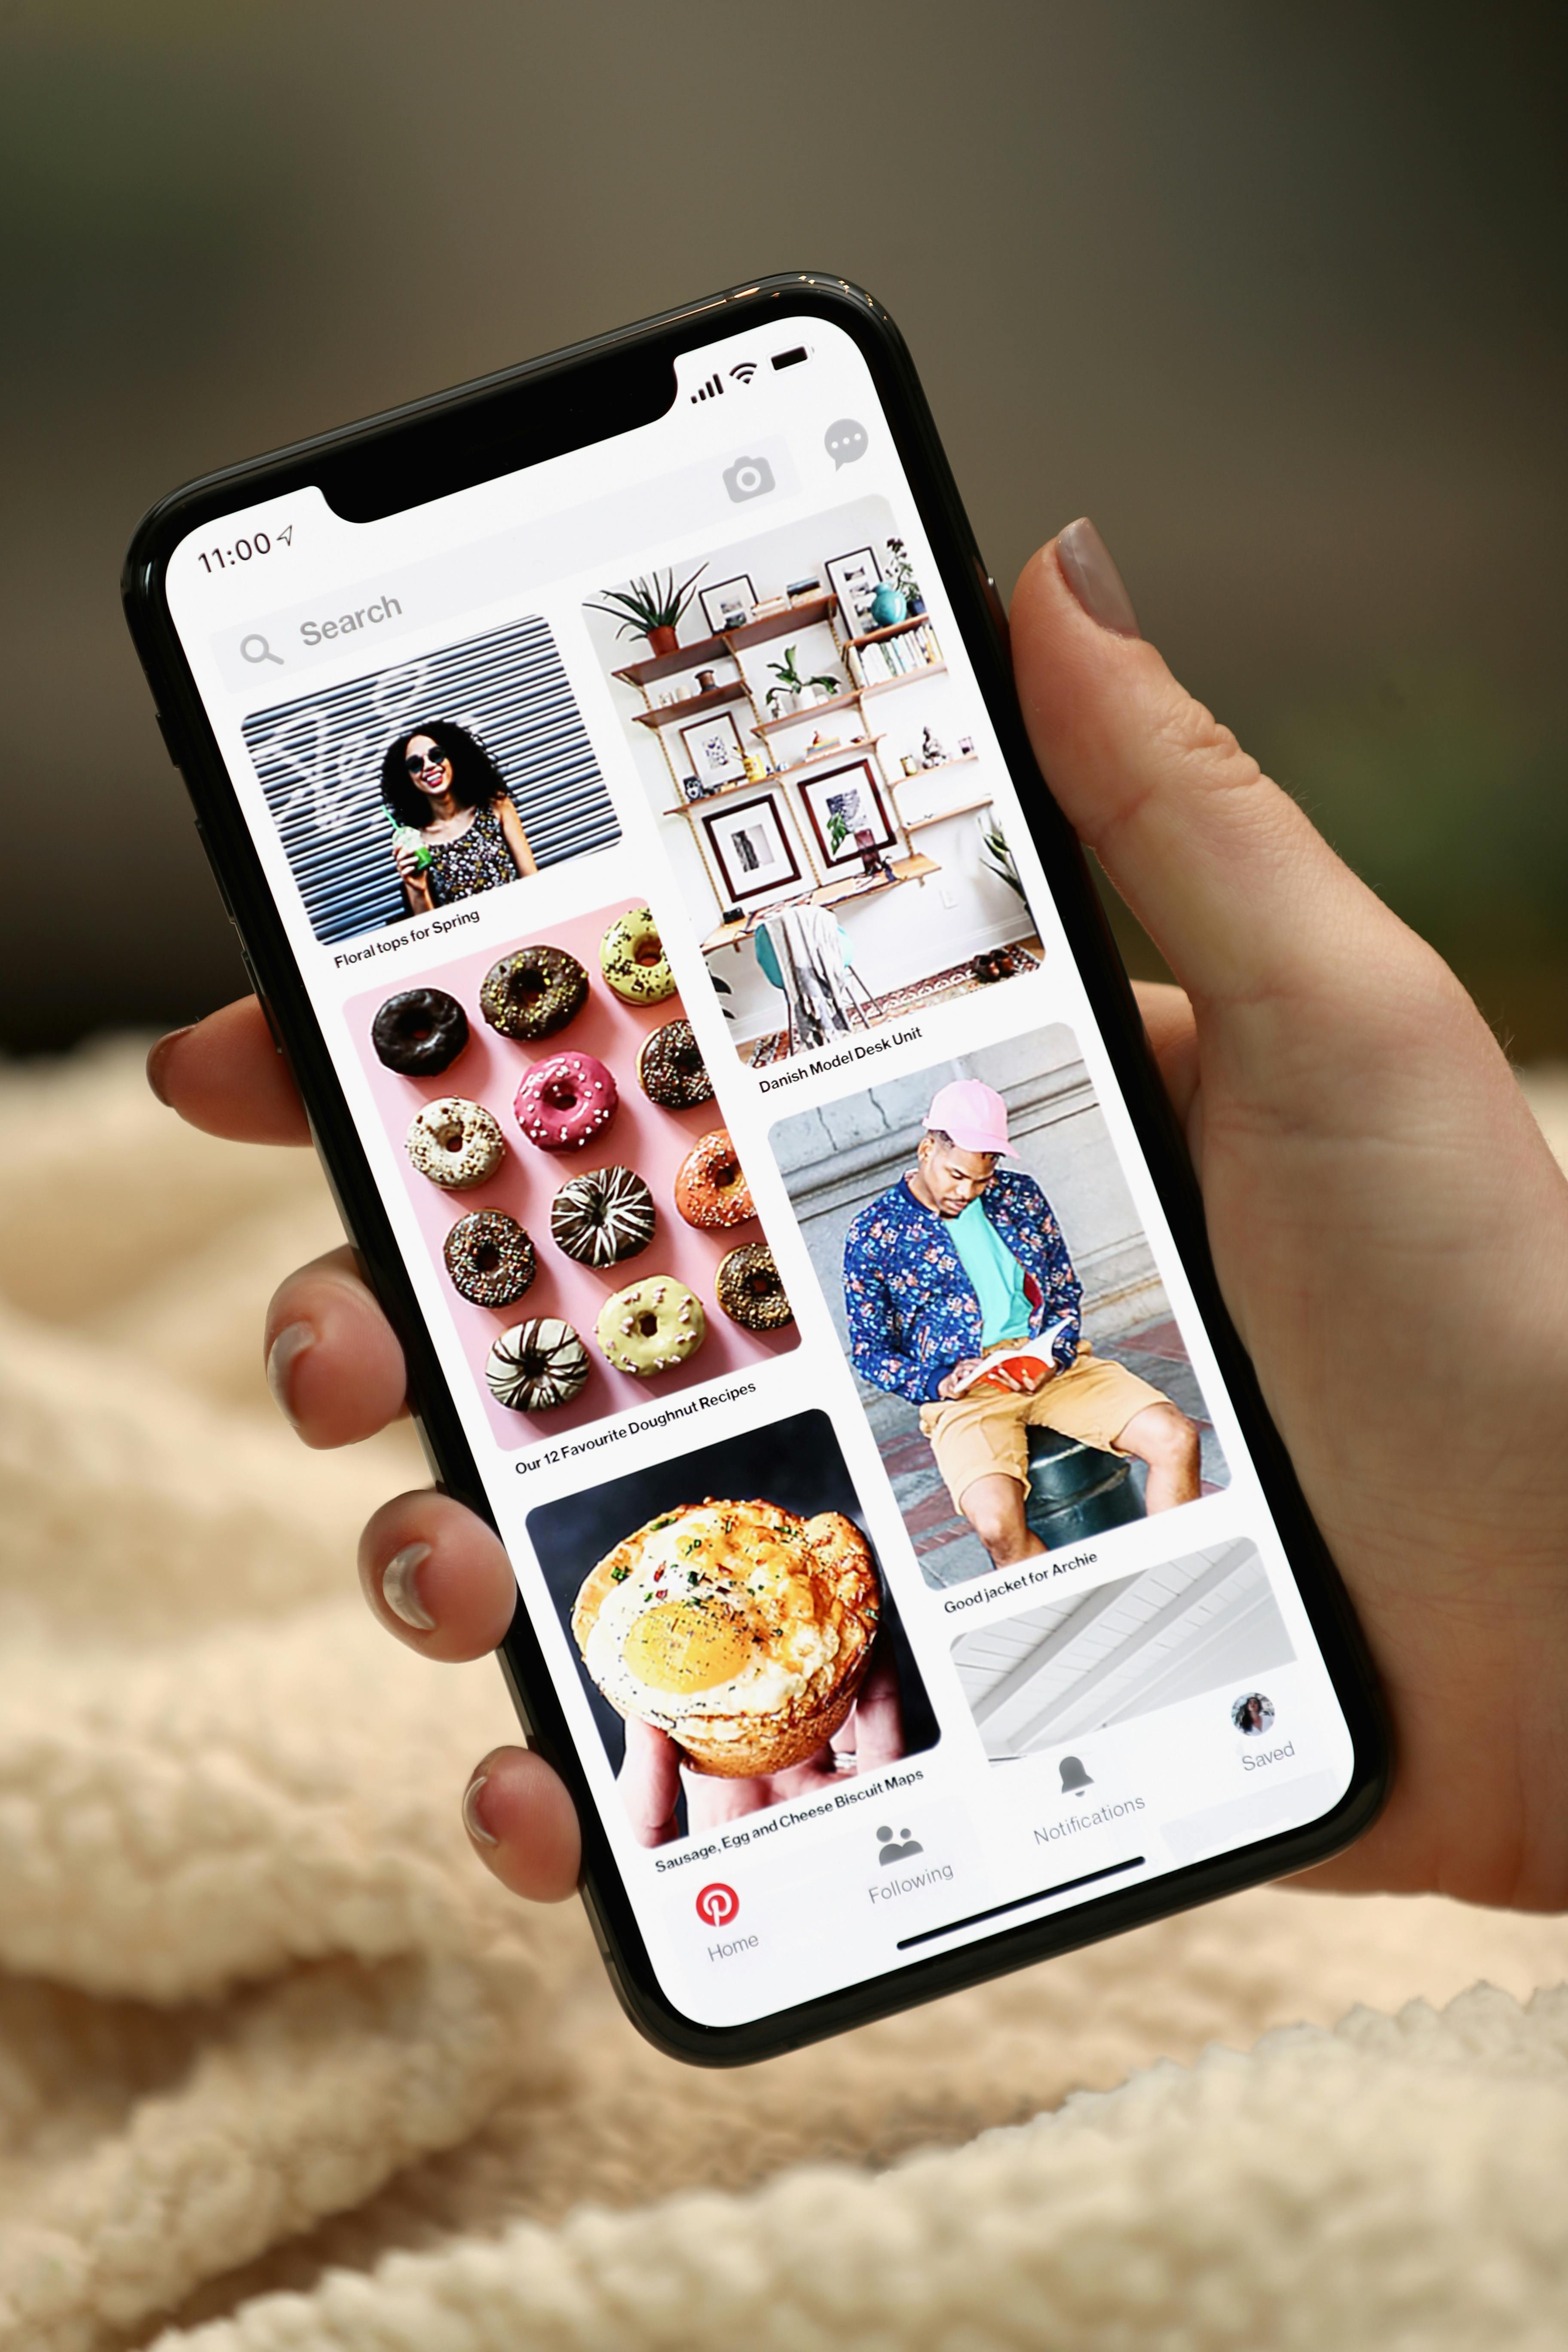 Snapchat Reported Accelerating Growth. Here's What to Expect From Pinterest